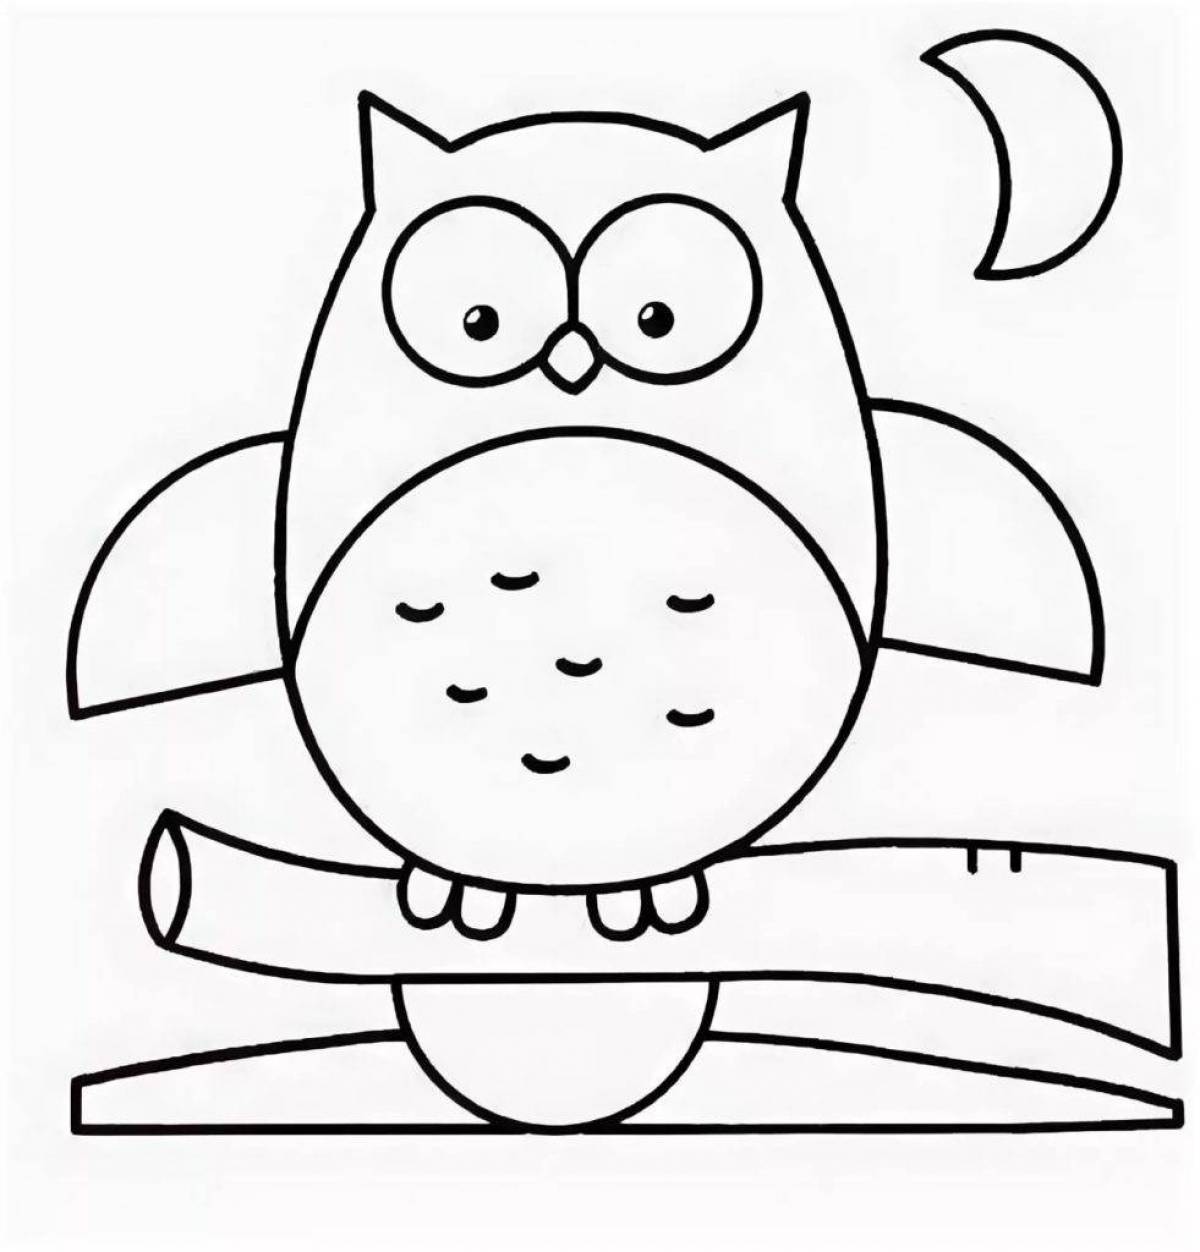 Soft coloring page